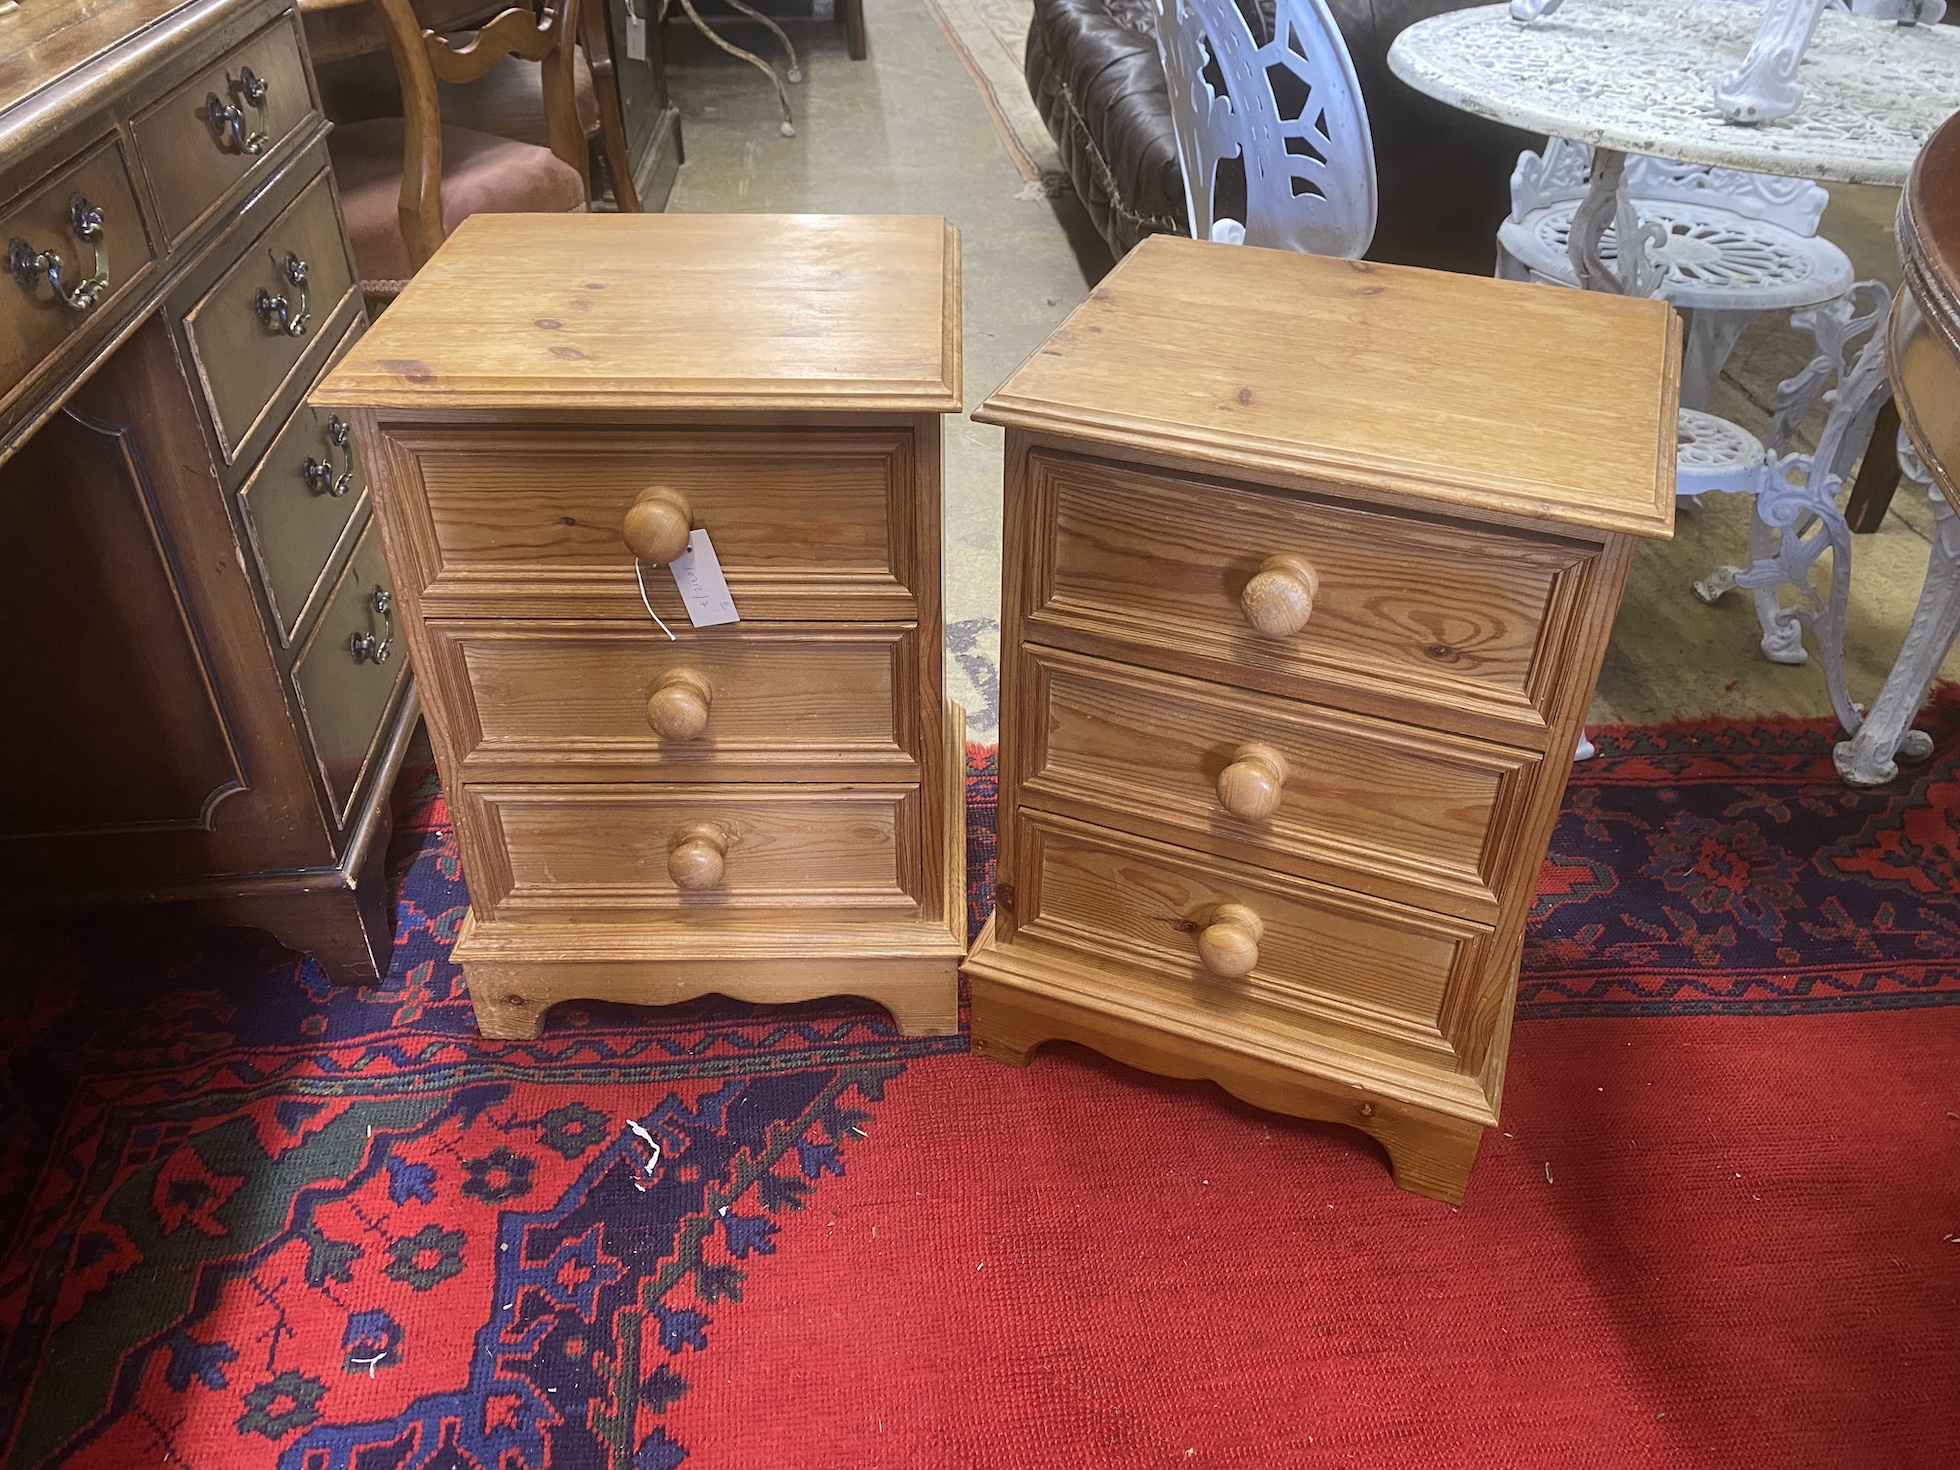 A pair of pine three drawer bedside chests, width 41cm, depth 36cm, height 59cm